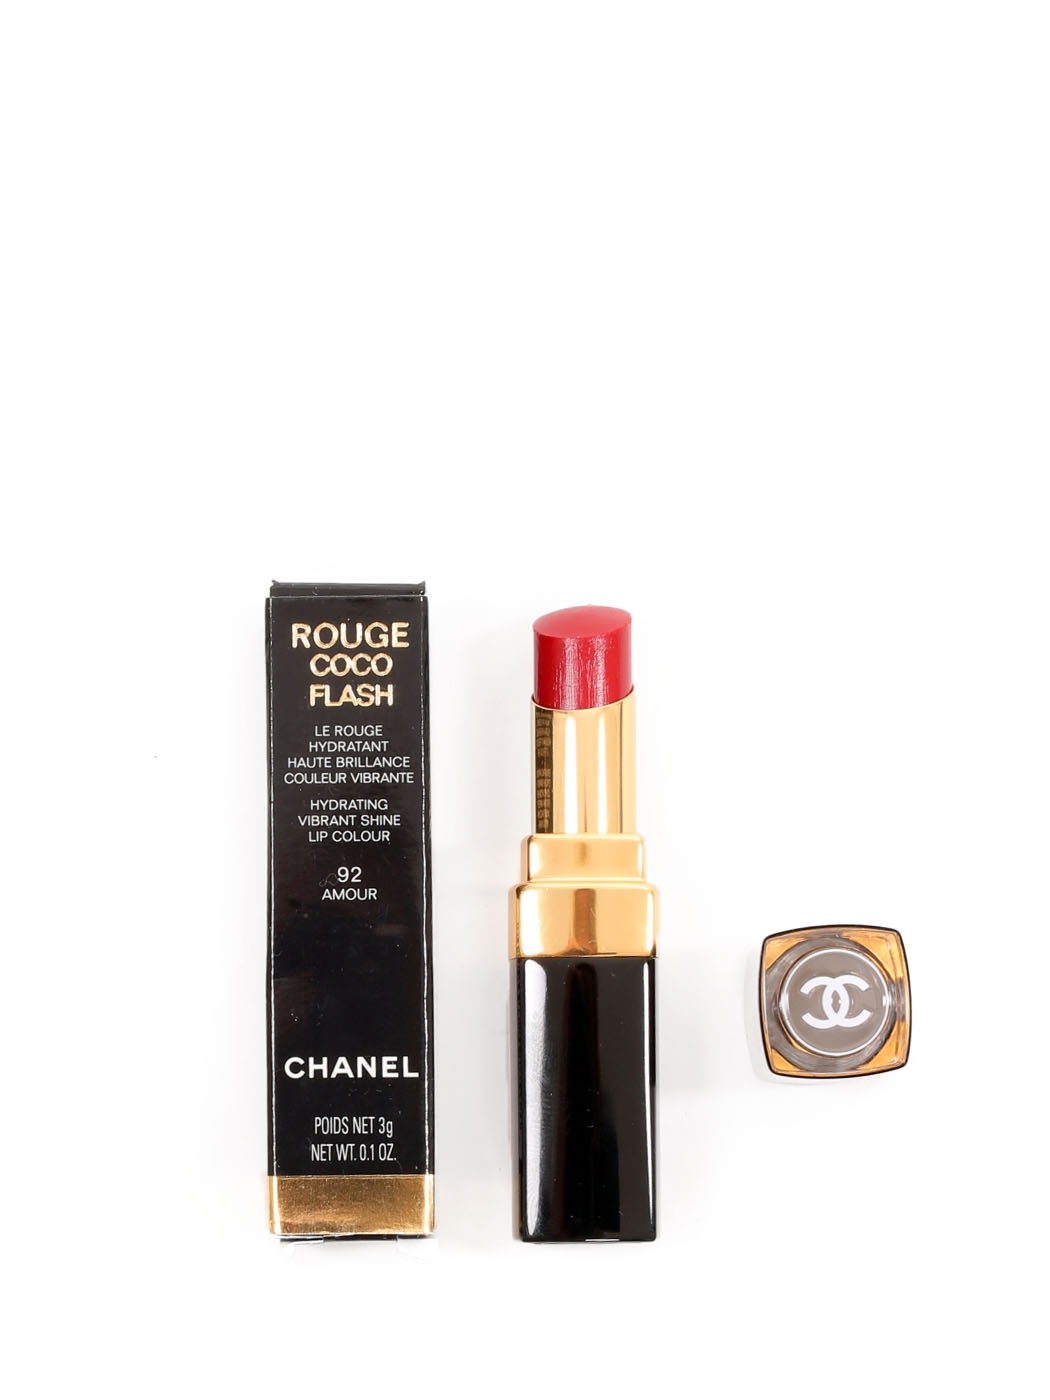 Chanel Emotion 92 Rouge Coco Shine Hydrating Sheer Lipshine Review   Swatches